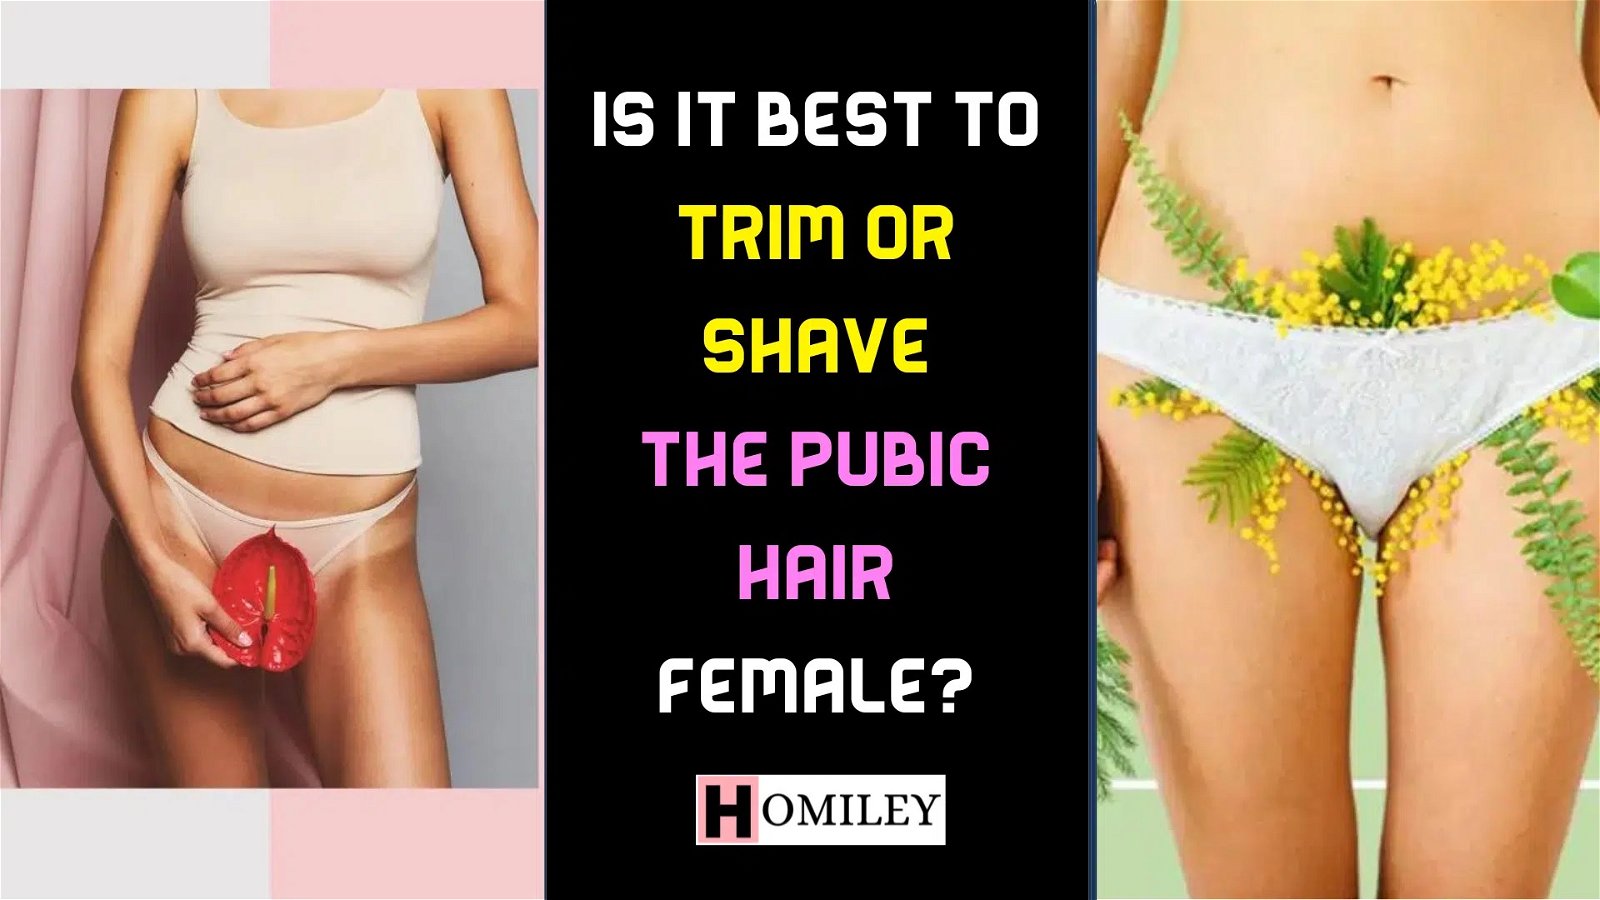 Here's What Men Really Think About Women's Pubic Hair | HuffPost Life